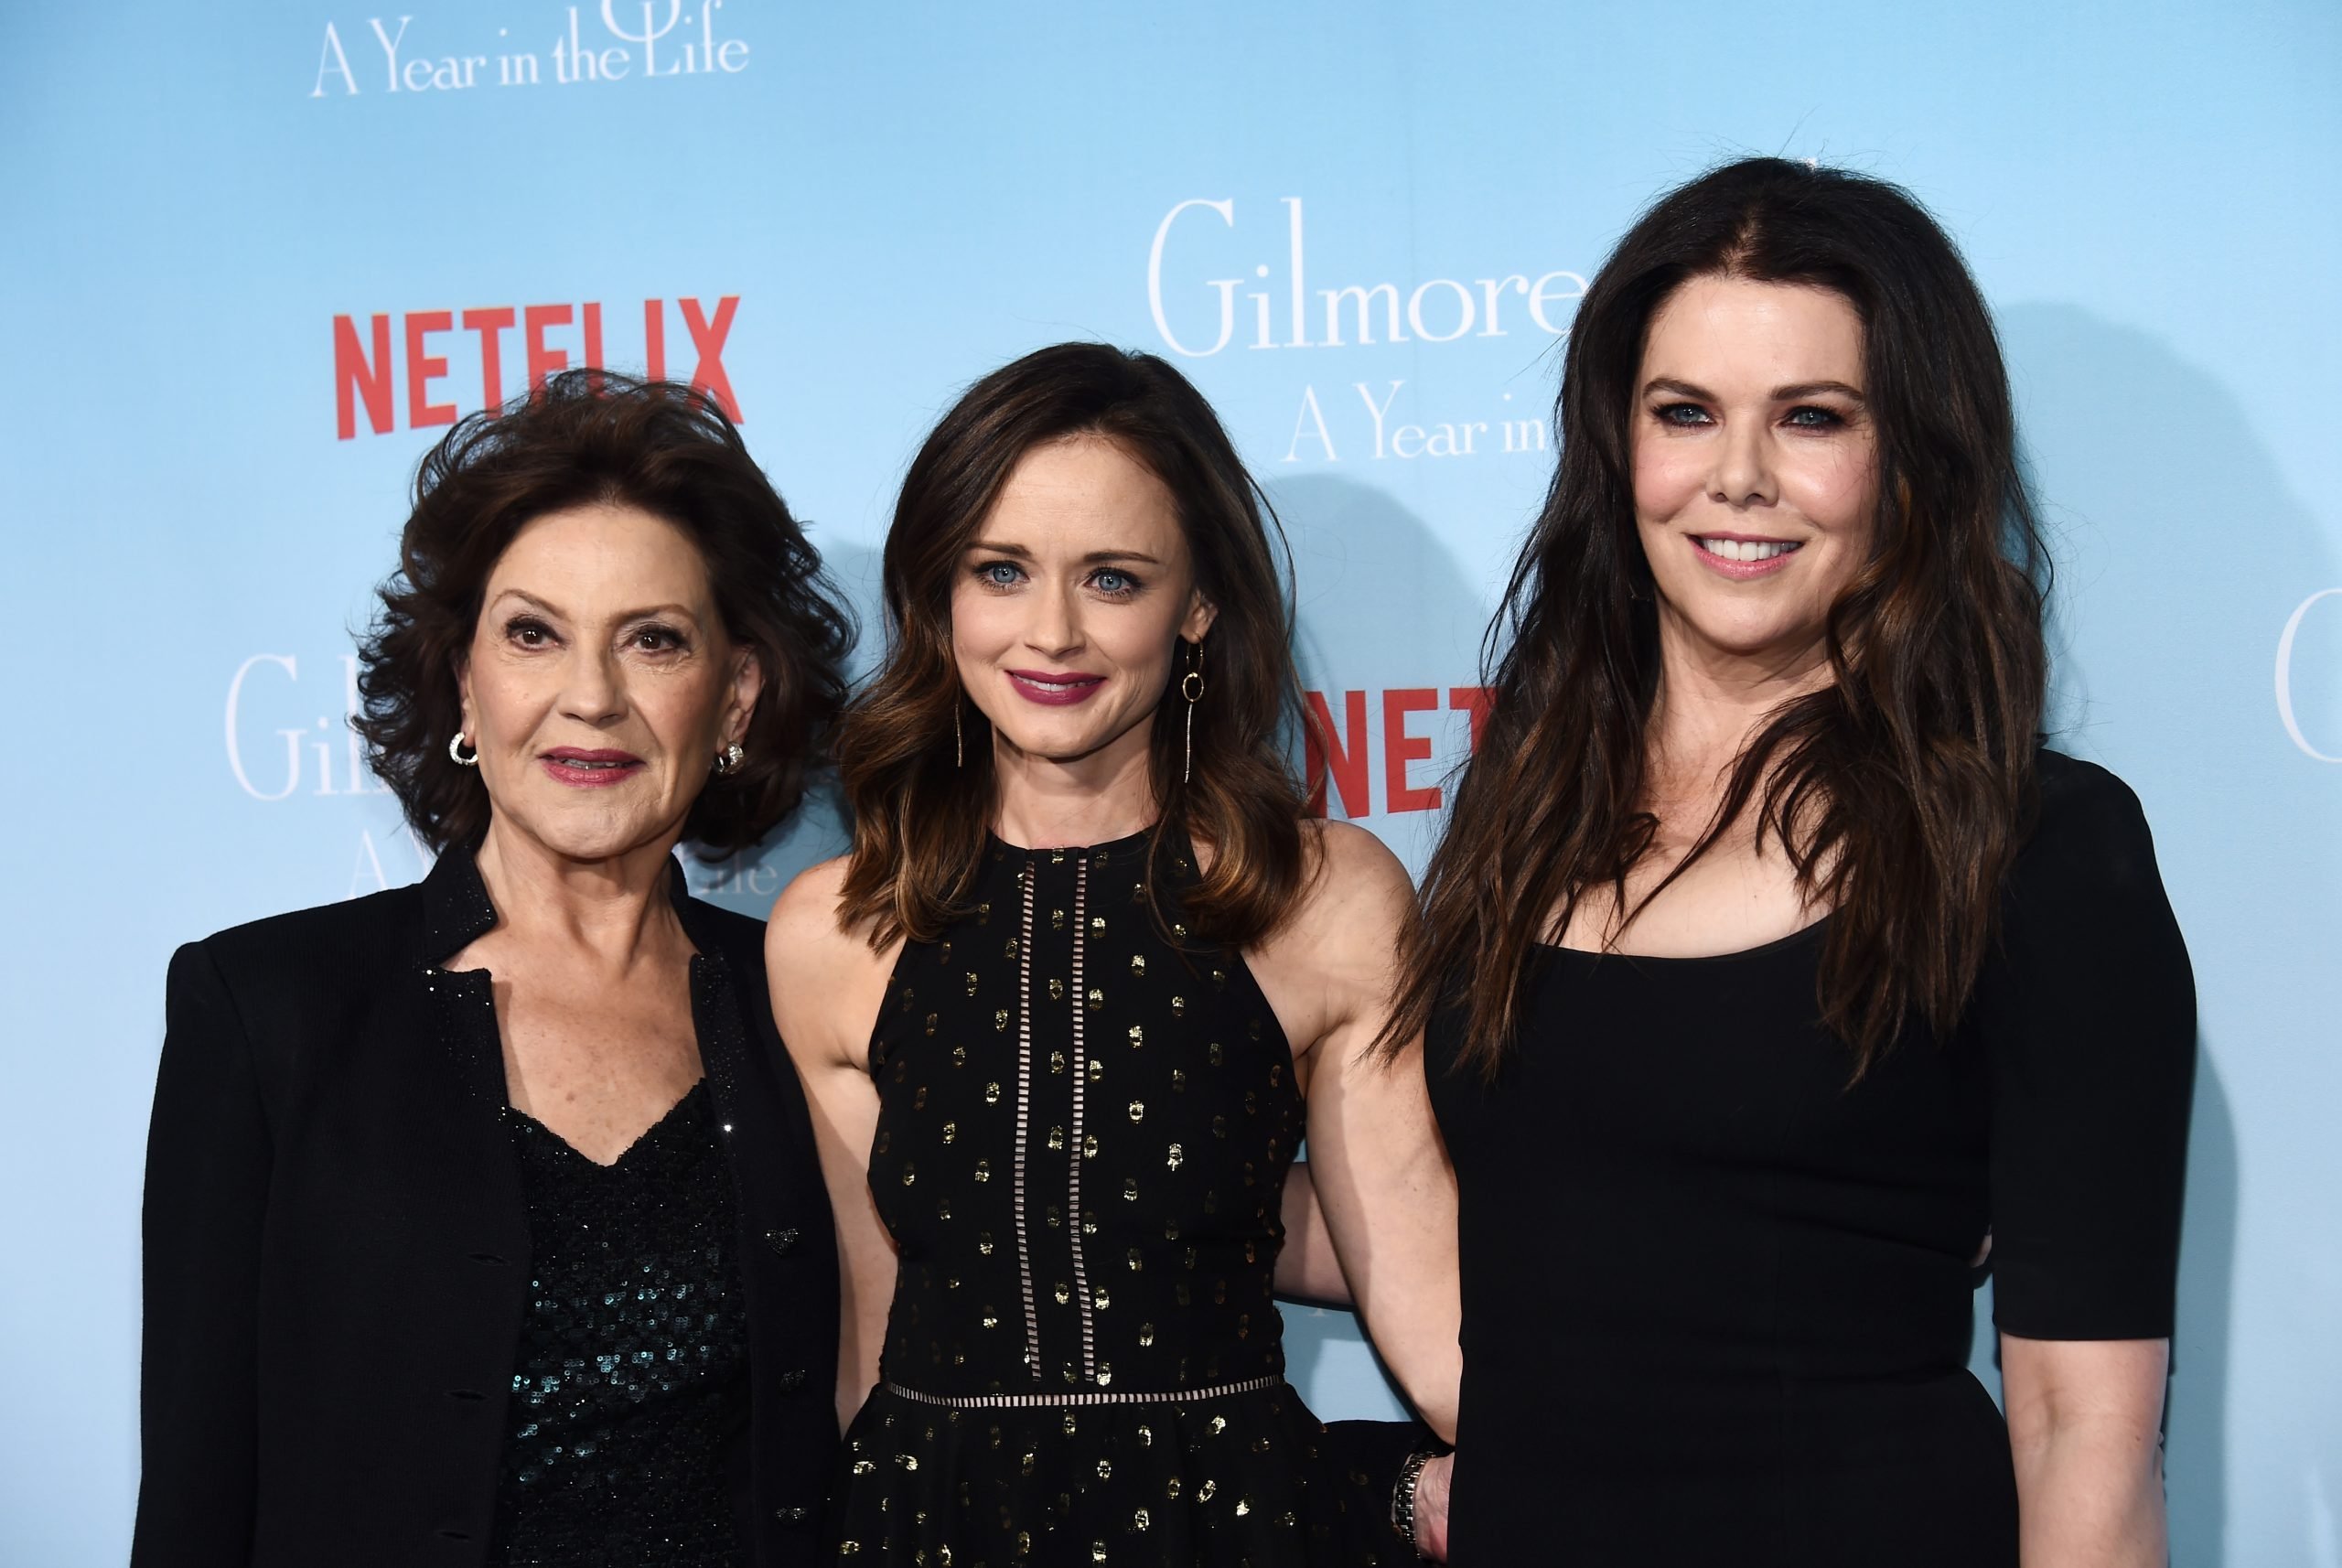 ‘Gilmore Girls’: 11 Episodes To Watch for All the Winter Feels